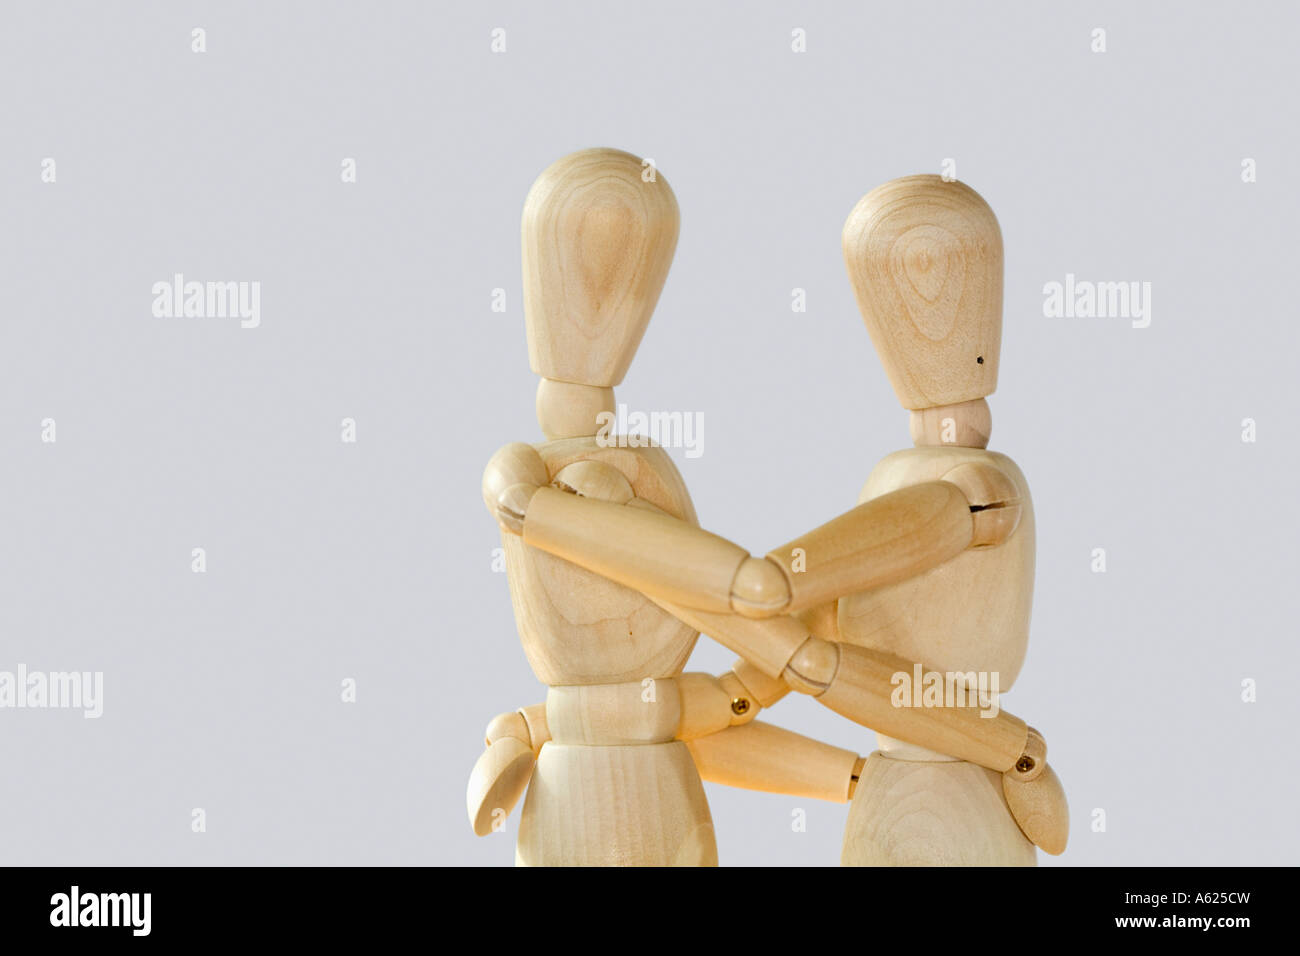 Concept two figures embrace hug cuddle Stock Photo